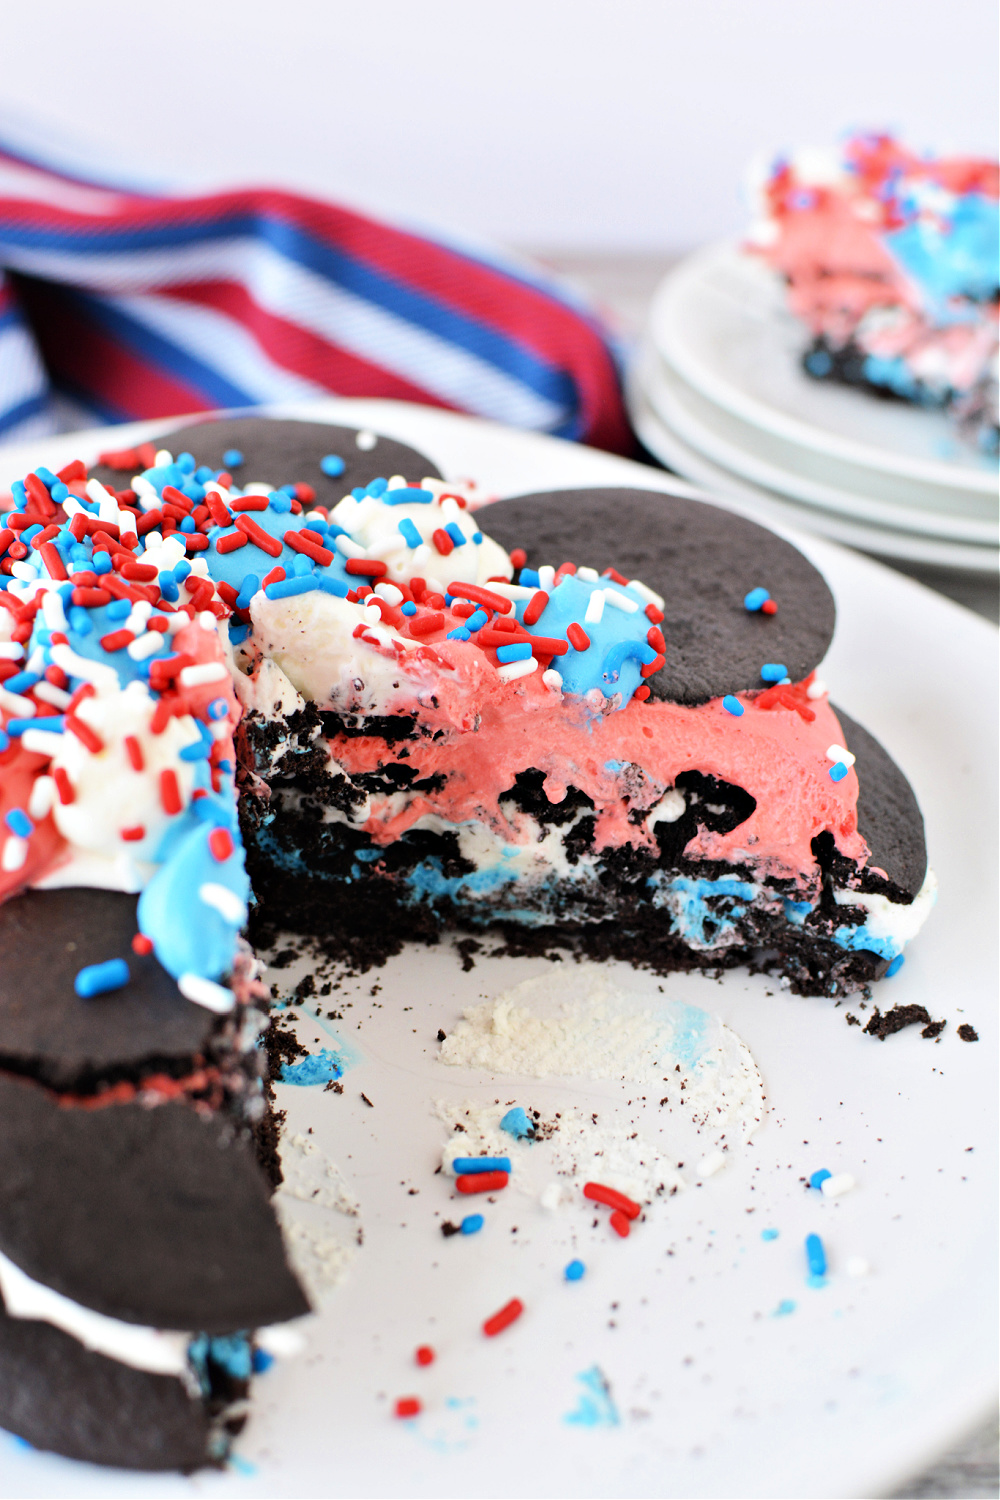 A red, white, and blue icebox cake with chocolate wafers, with a slice cut out of it